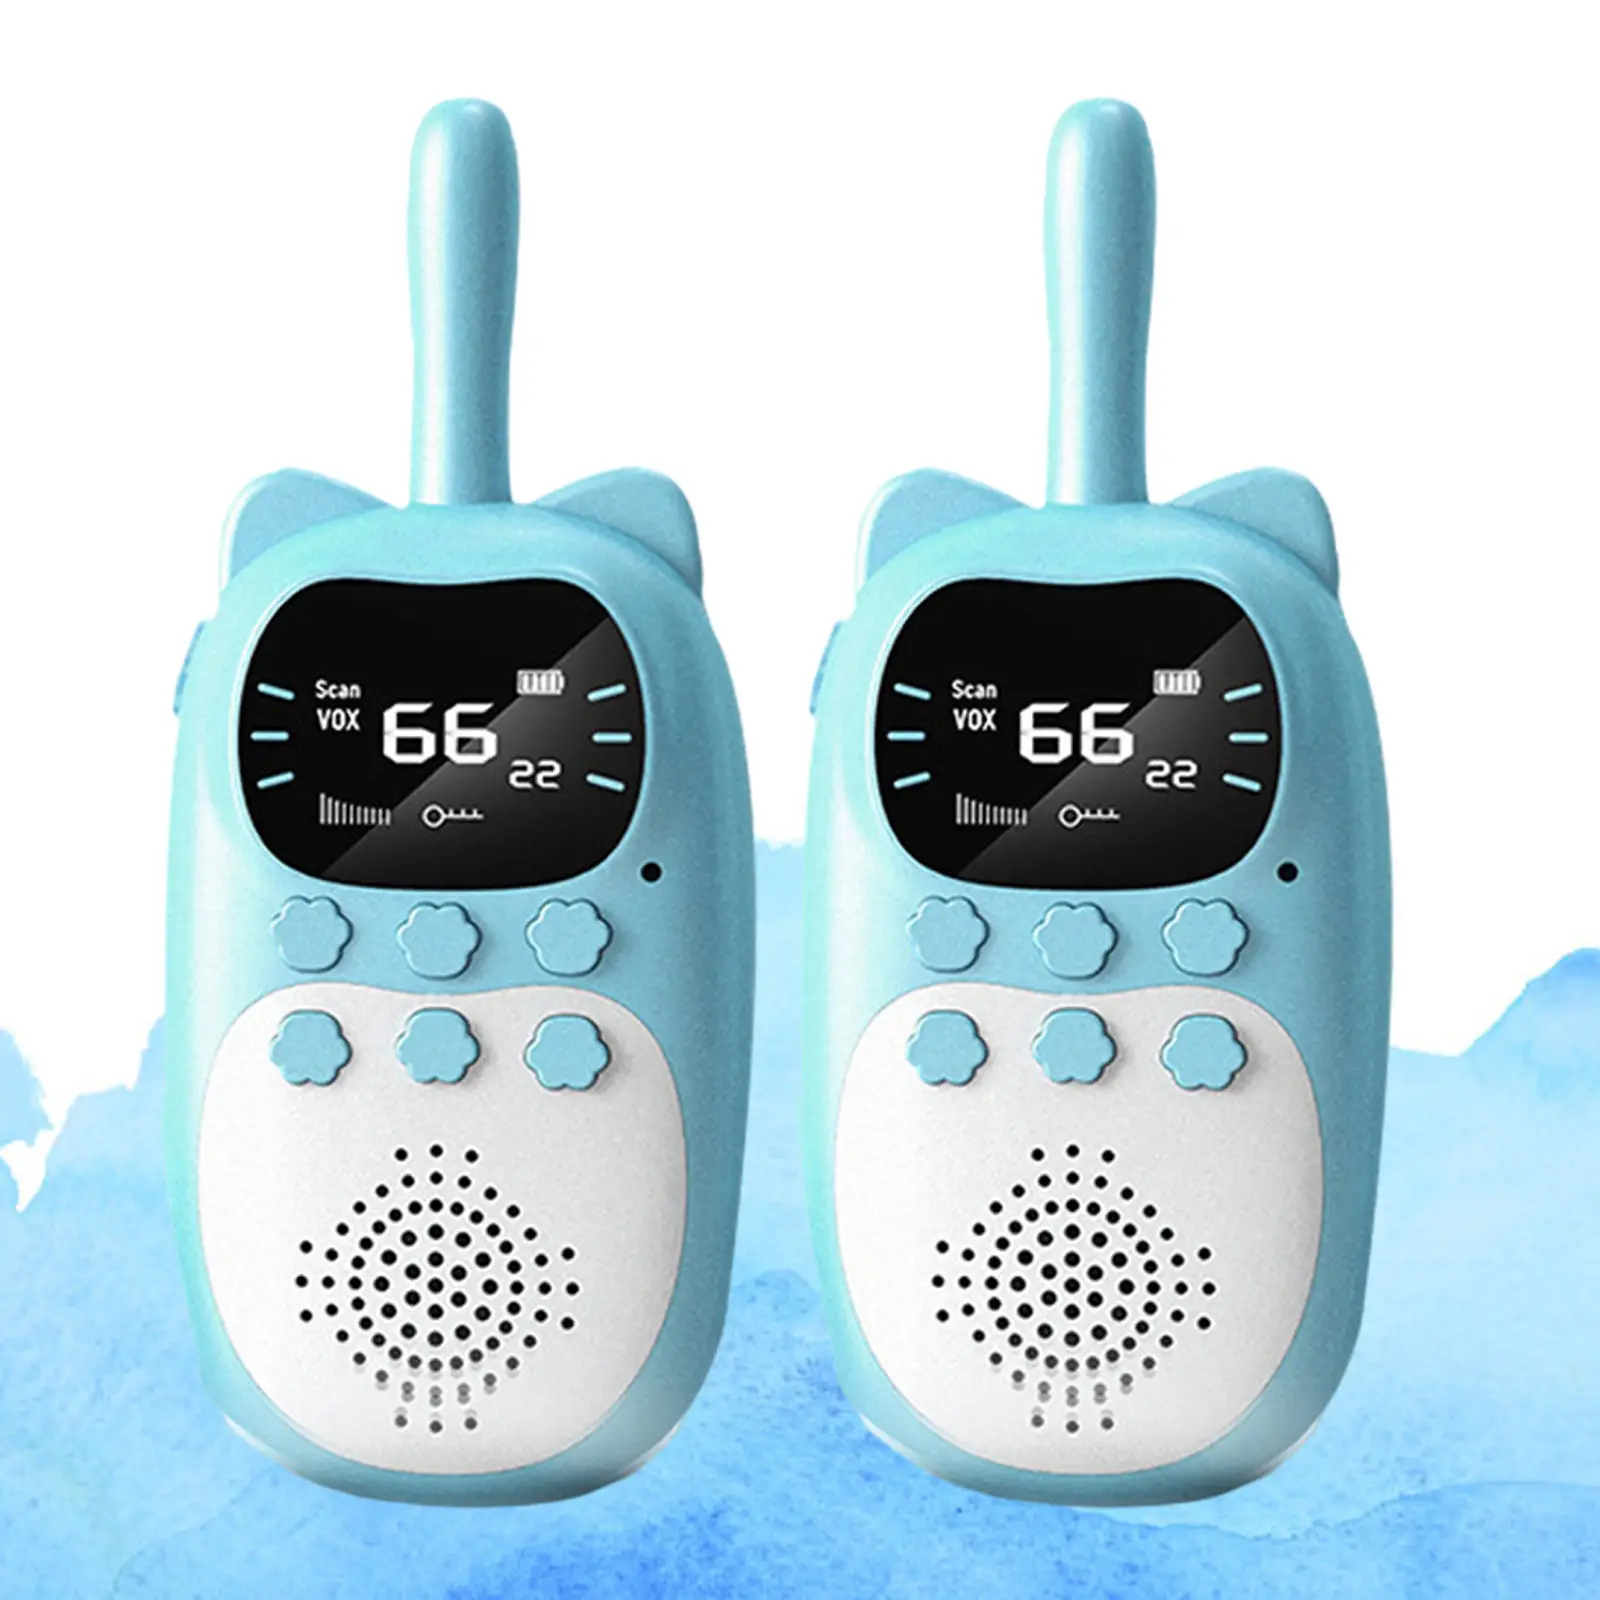 ABS Kids Walkie Talkies with FM Radio LCD Toys for Children Fishing Camping